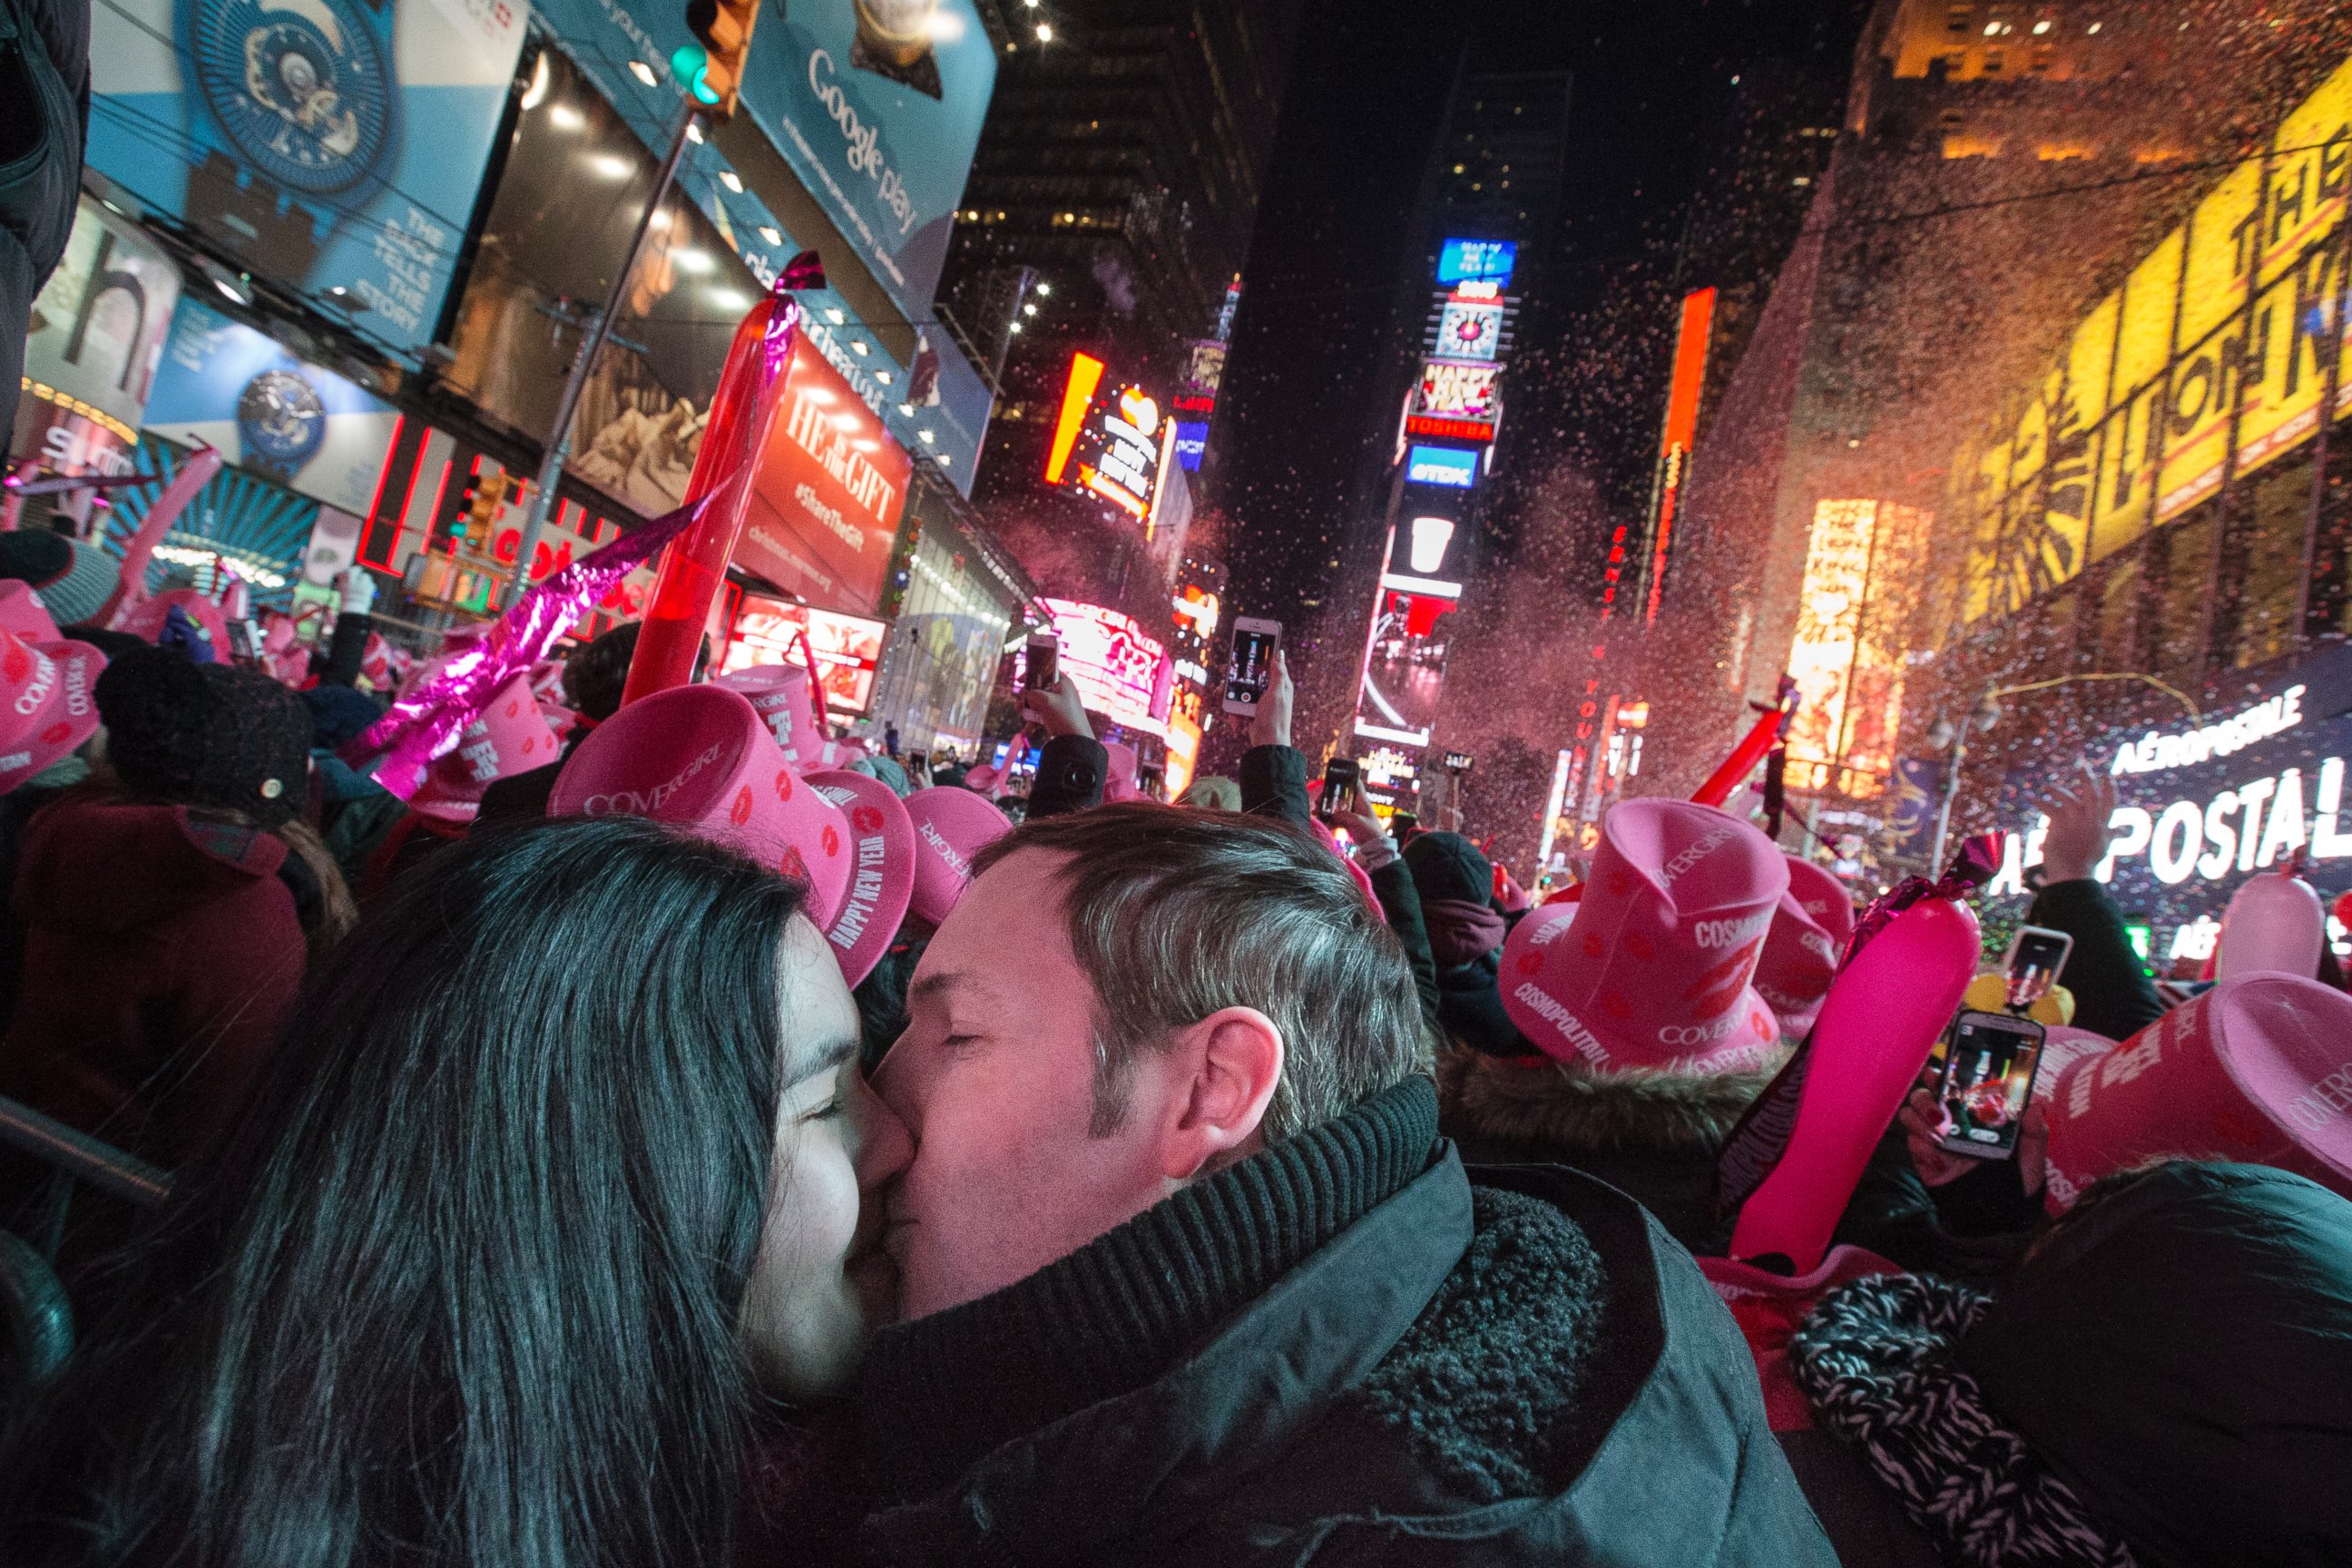 Chris and Chelsea Crawford, of Scotland, share a kiss at midnight in Times Square during a New Year's Eve celebration, Thursday, Jan. 1, 2015, in New York. Thousands braved the cold to watch the annual ball drop and ring in the new year.